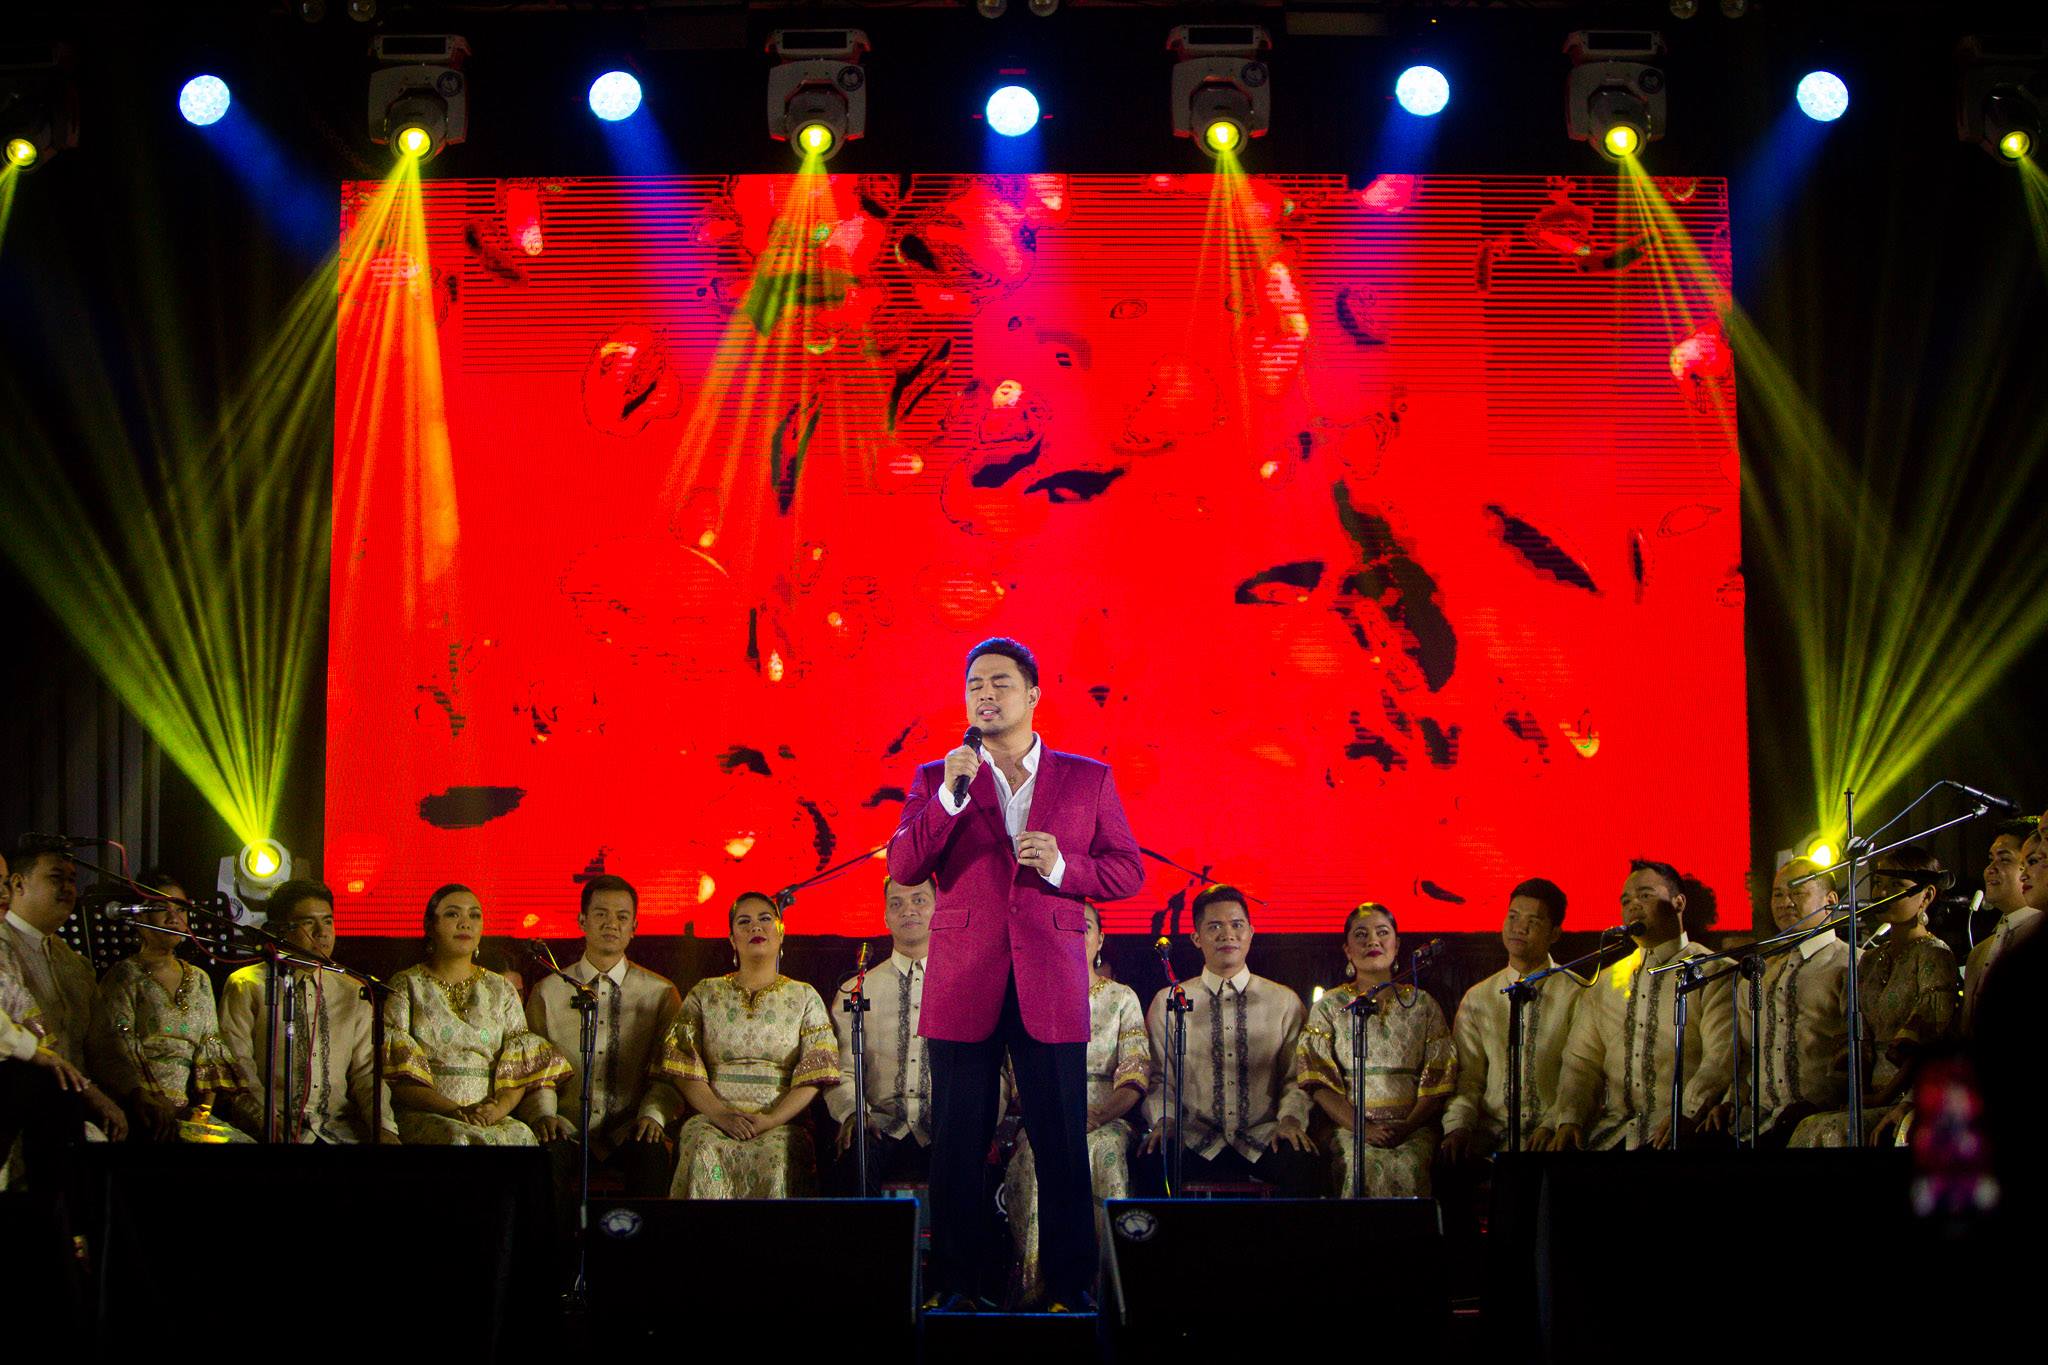 Jed Madela, Madrigal Singers in one musical extravaganza for the senses